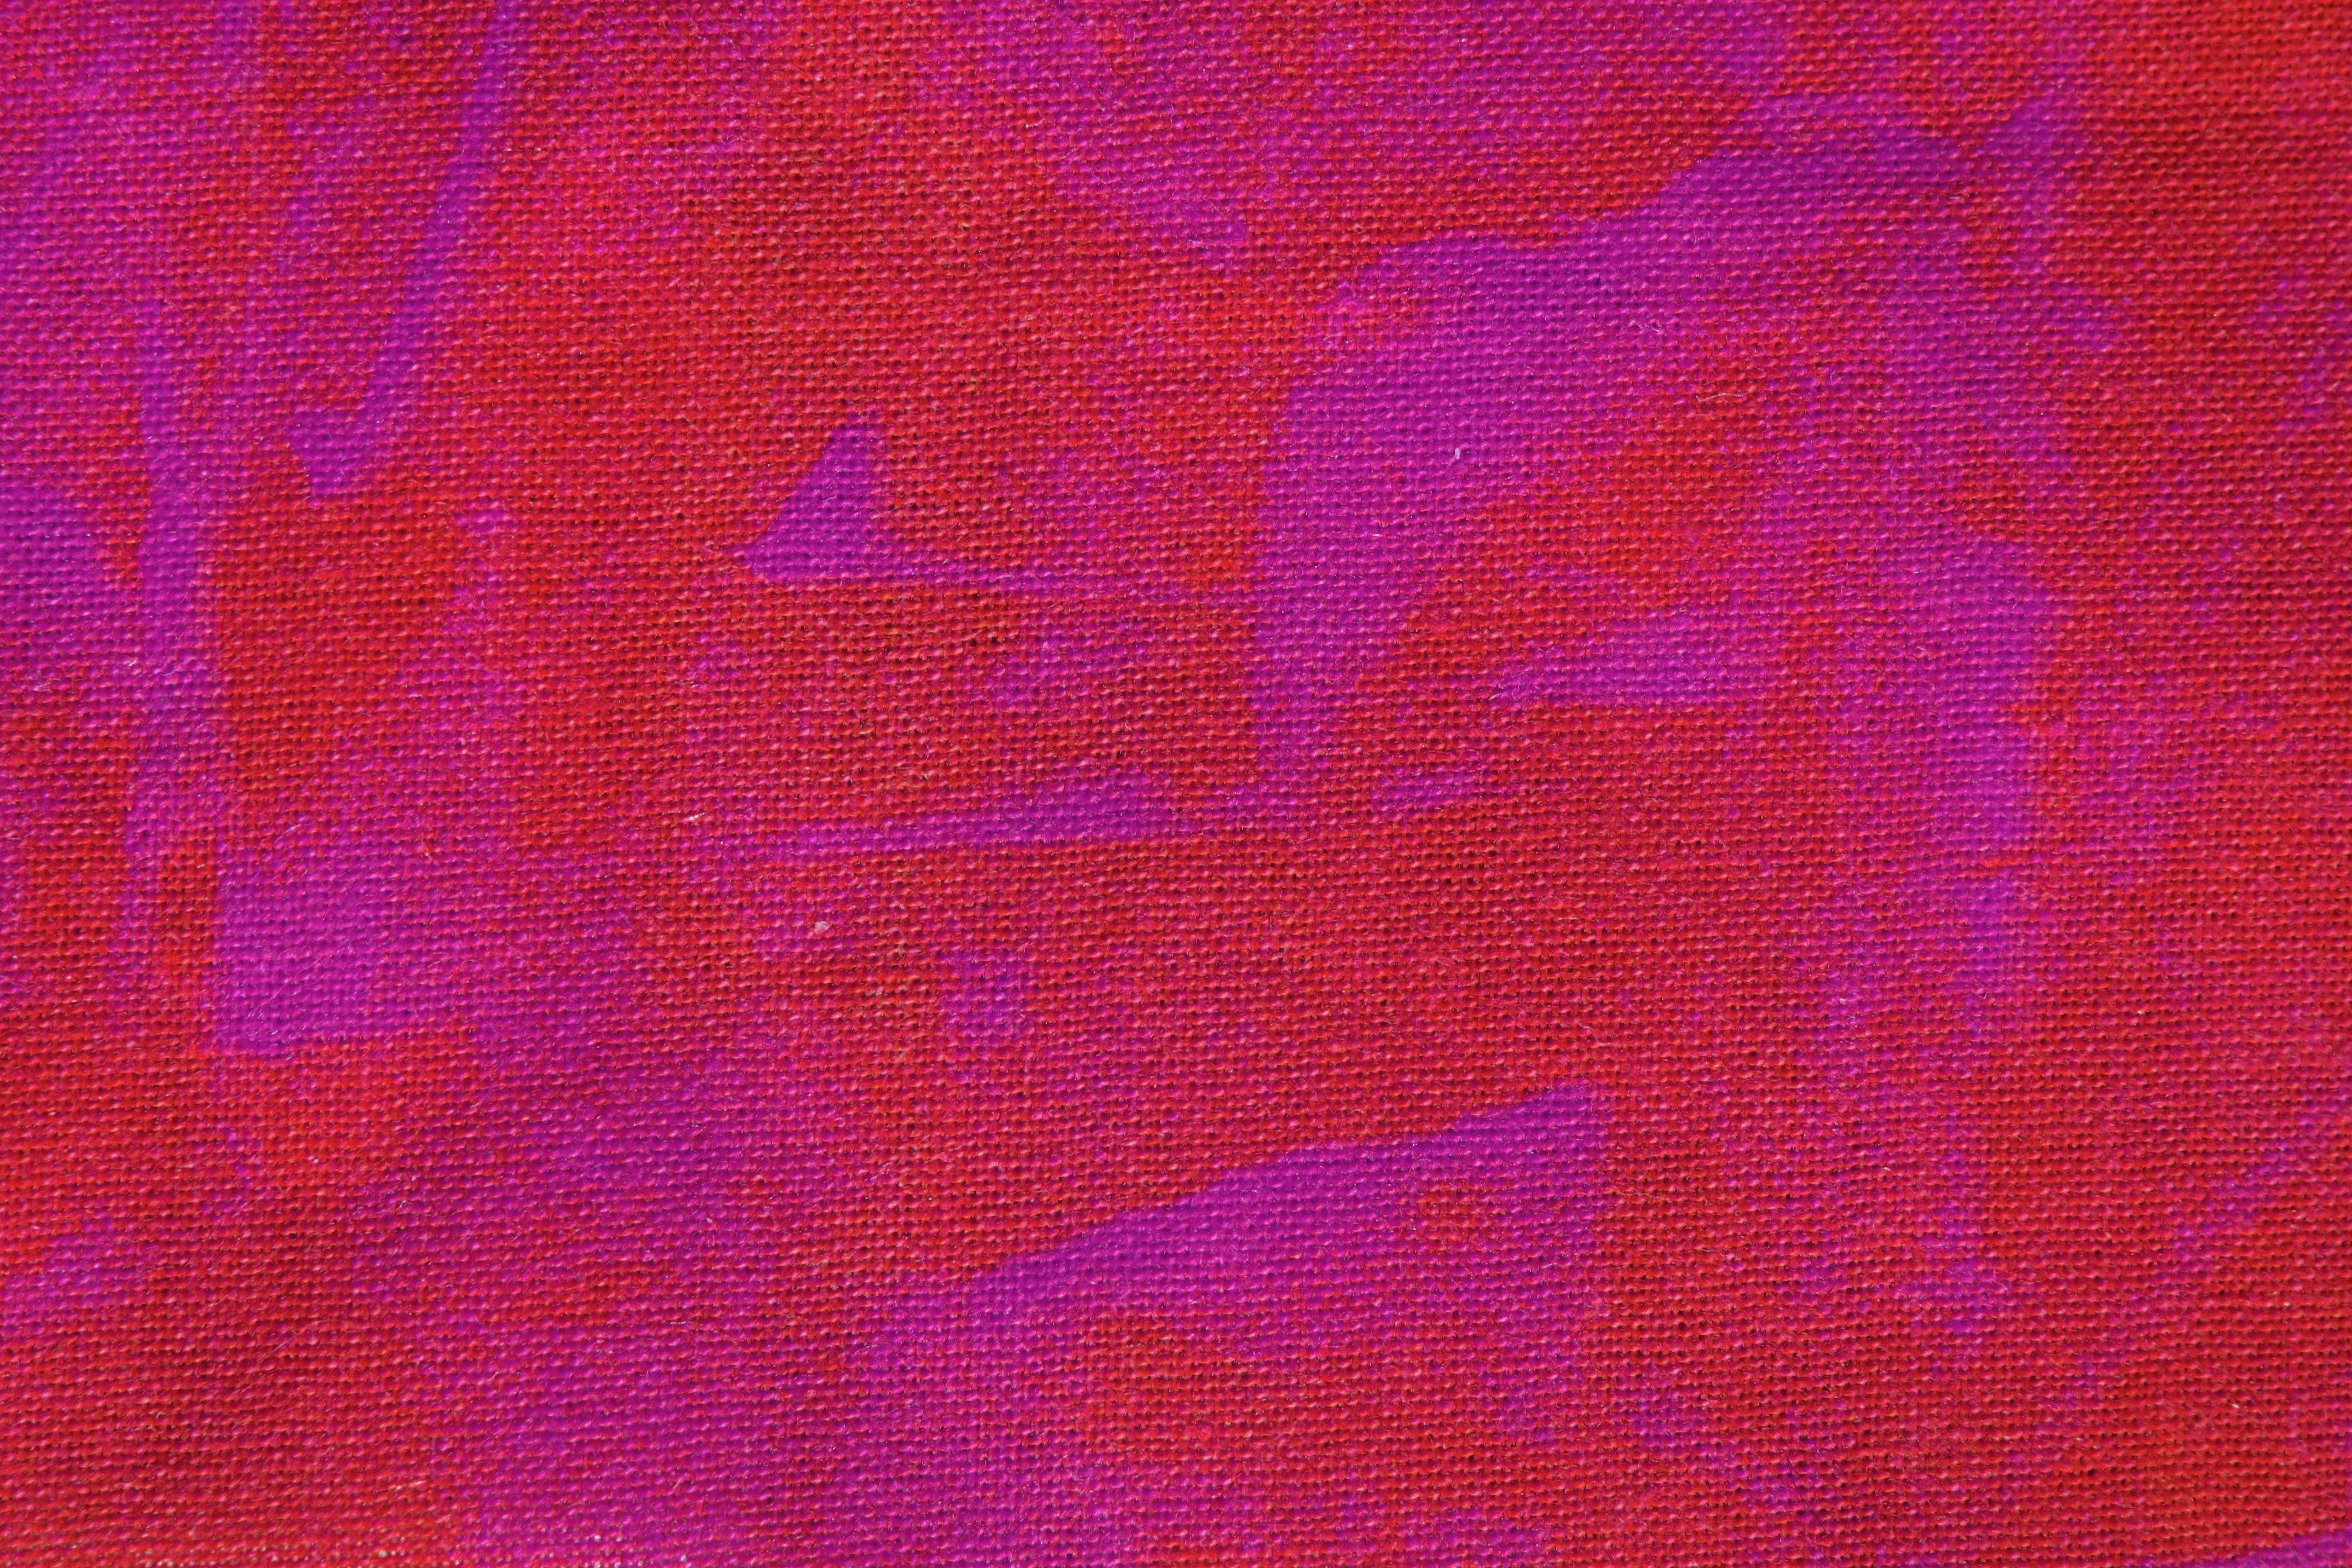 Red and Purple Random Pattern Print Fabric Texture Picture Free